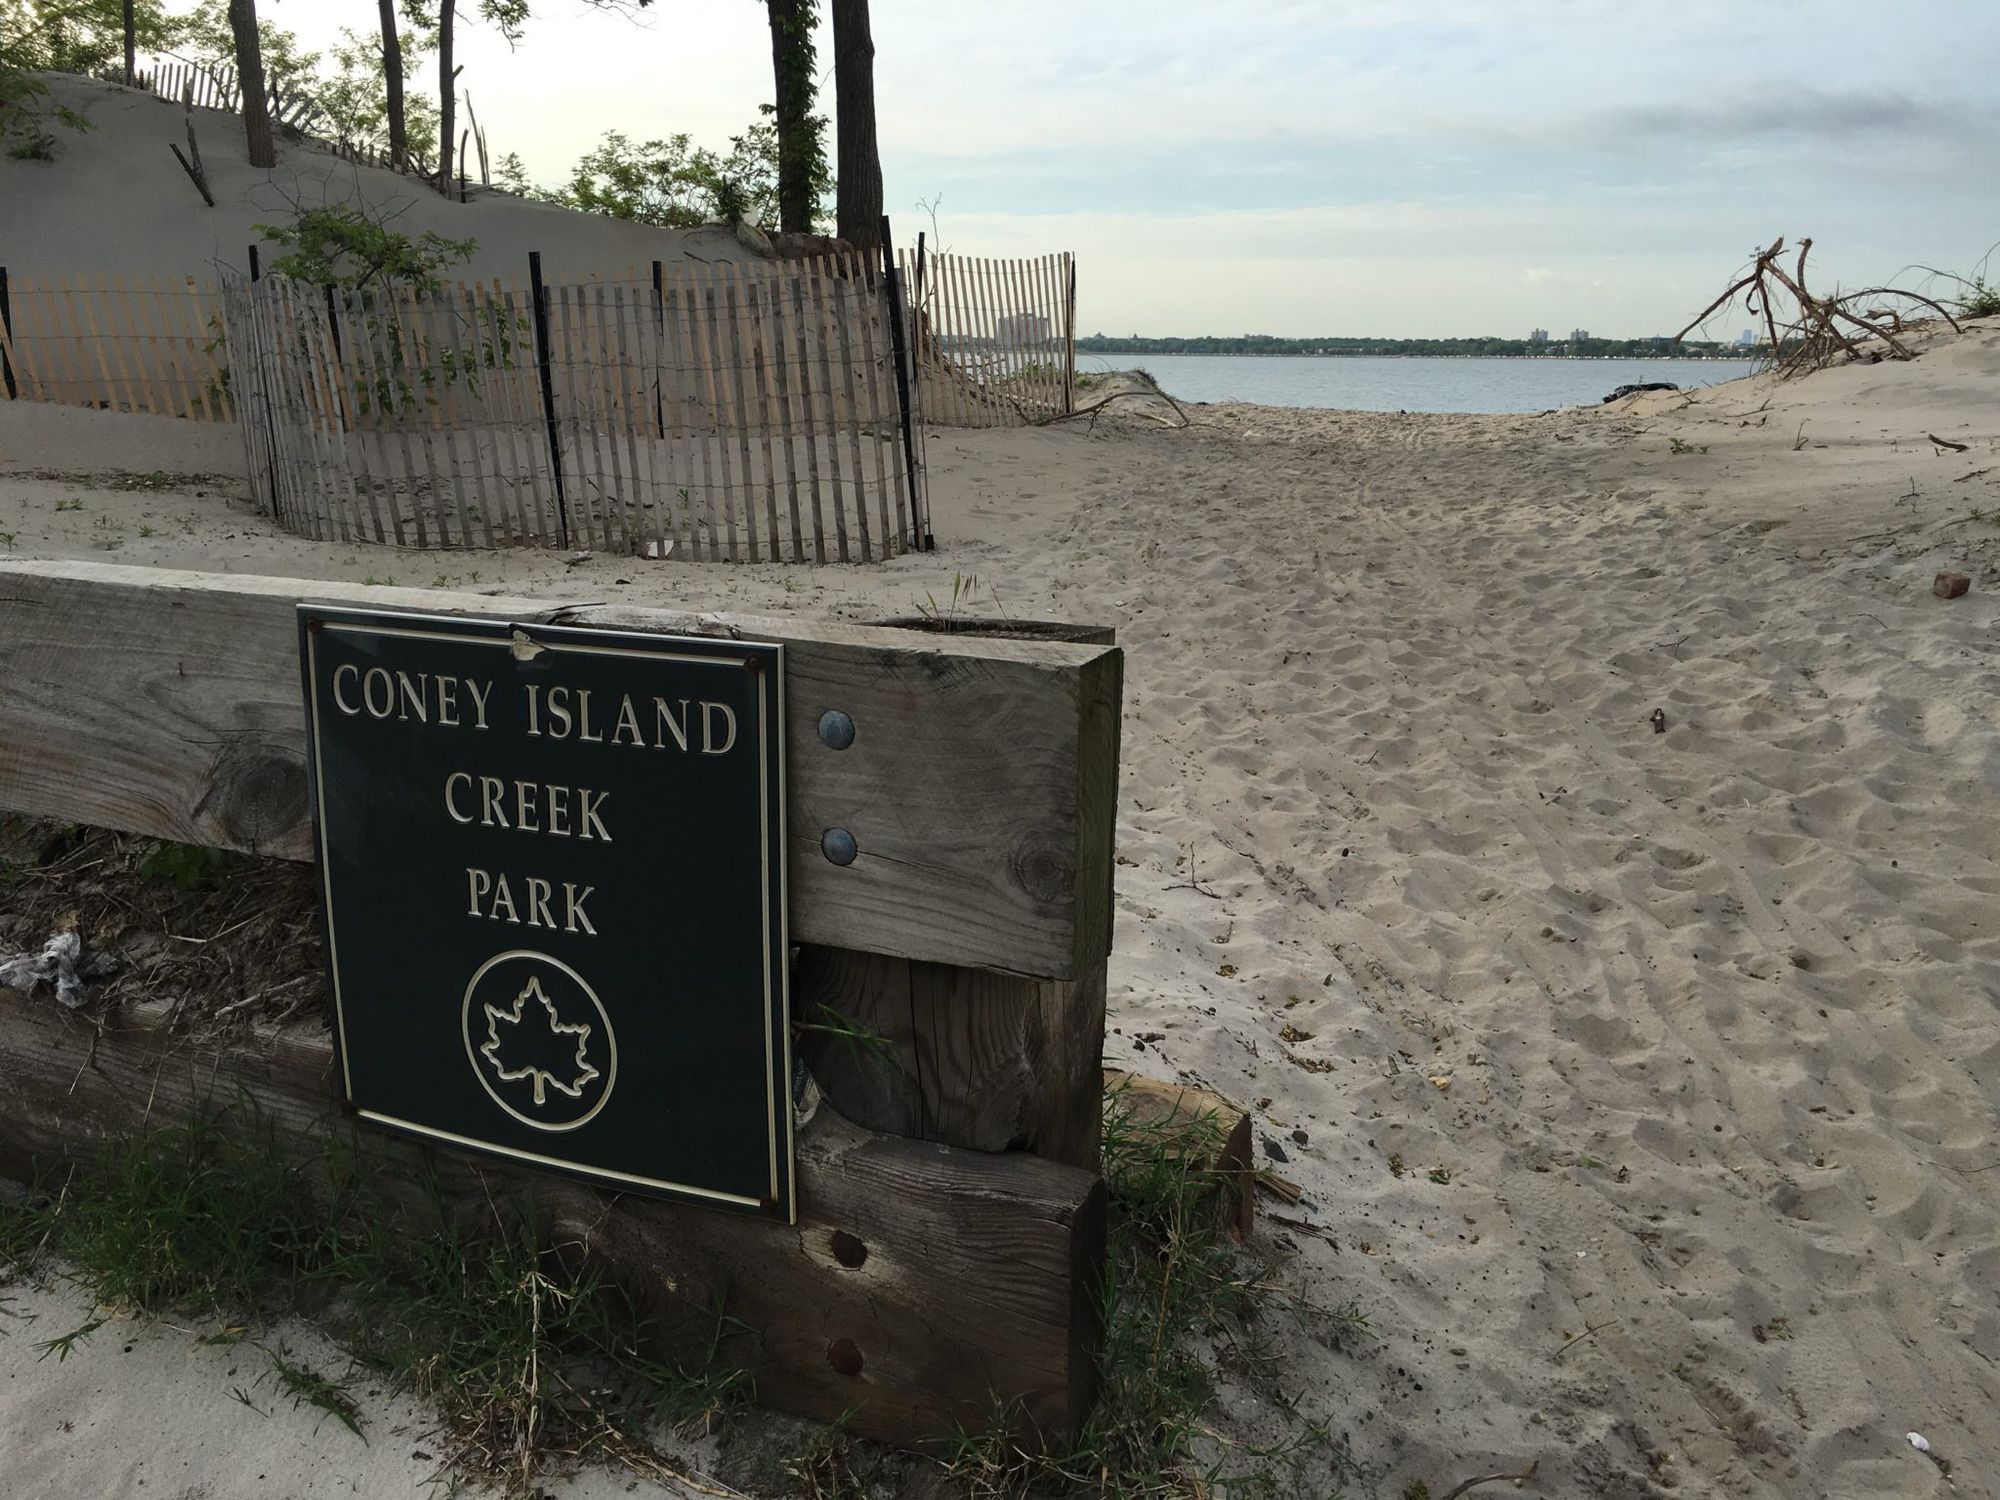 Coney Island Creek – Good Enough to Dump Untreated Sewage in, Not Good Enough to Have Oysters to Clean It Up.